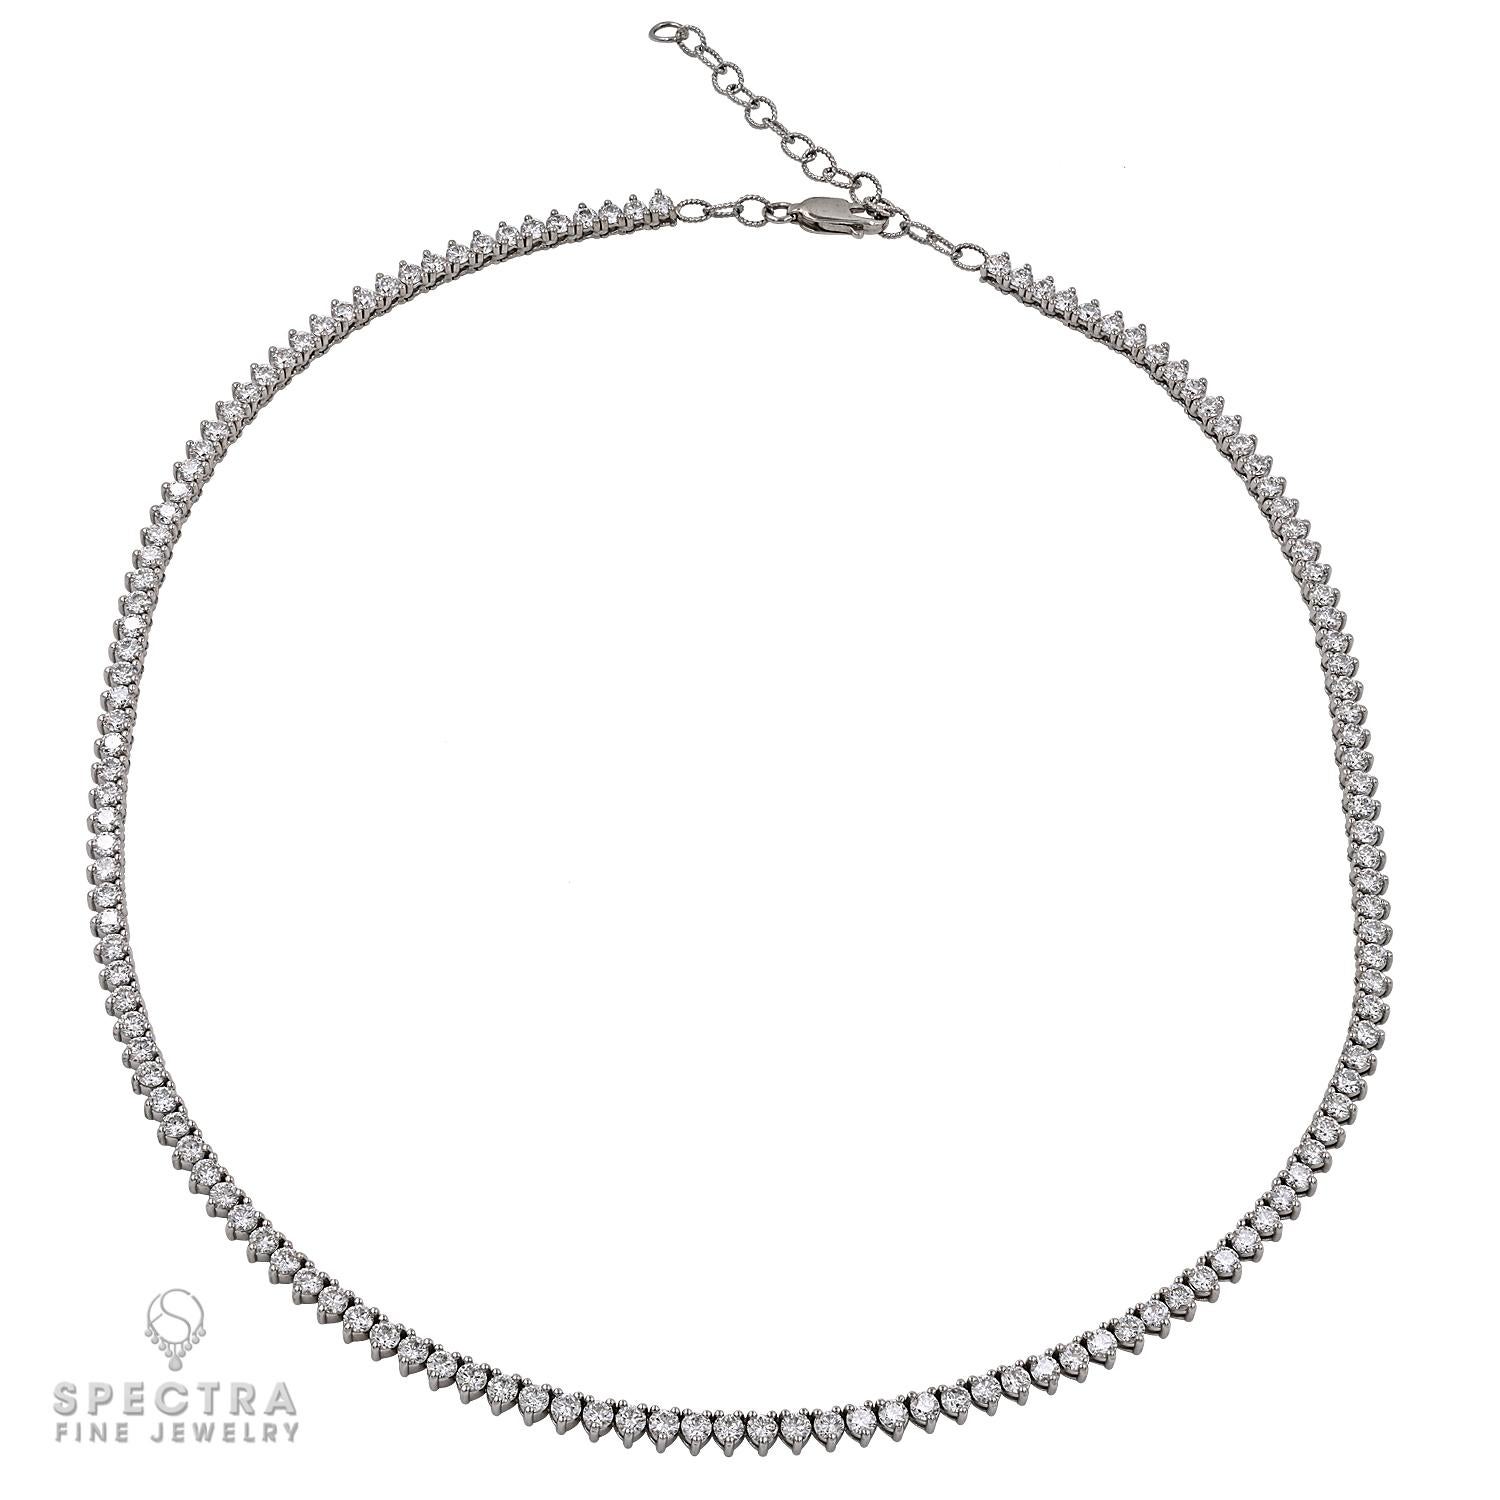 Contemporary Spectra Fine Jewelry 7.89 Carat Round Diamond Tennis Necklace in 18k Gold For Sale